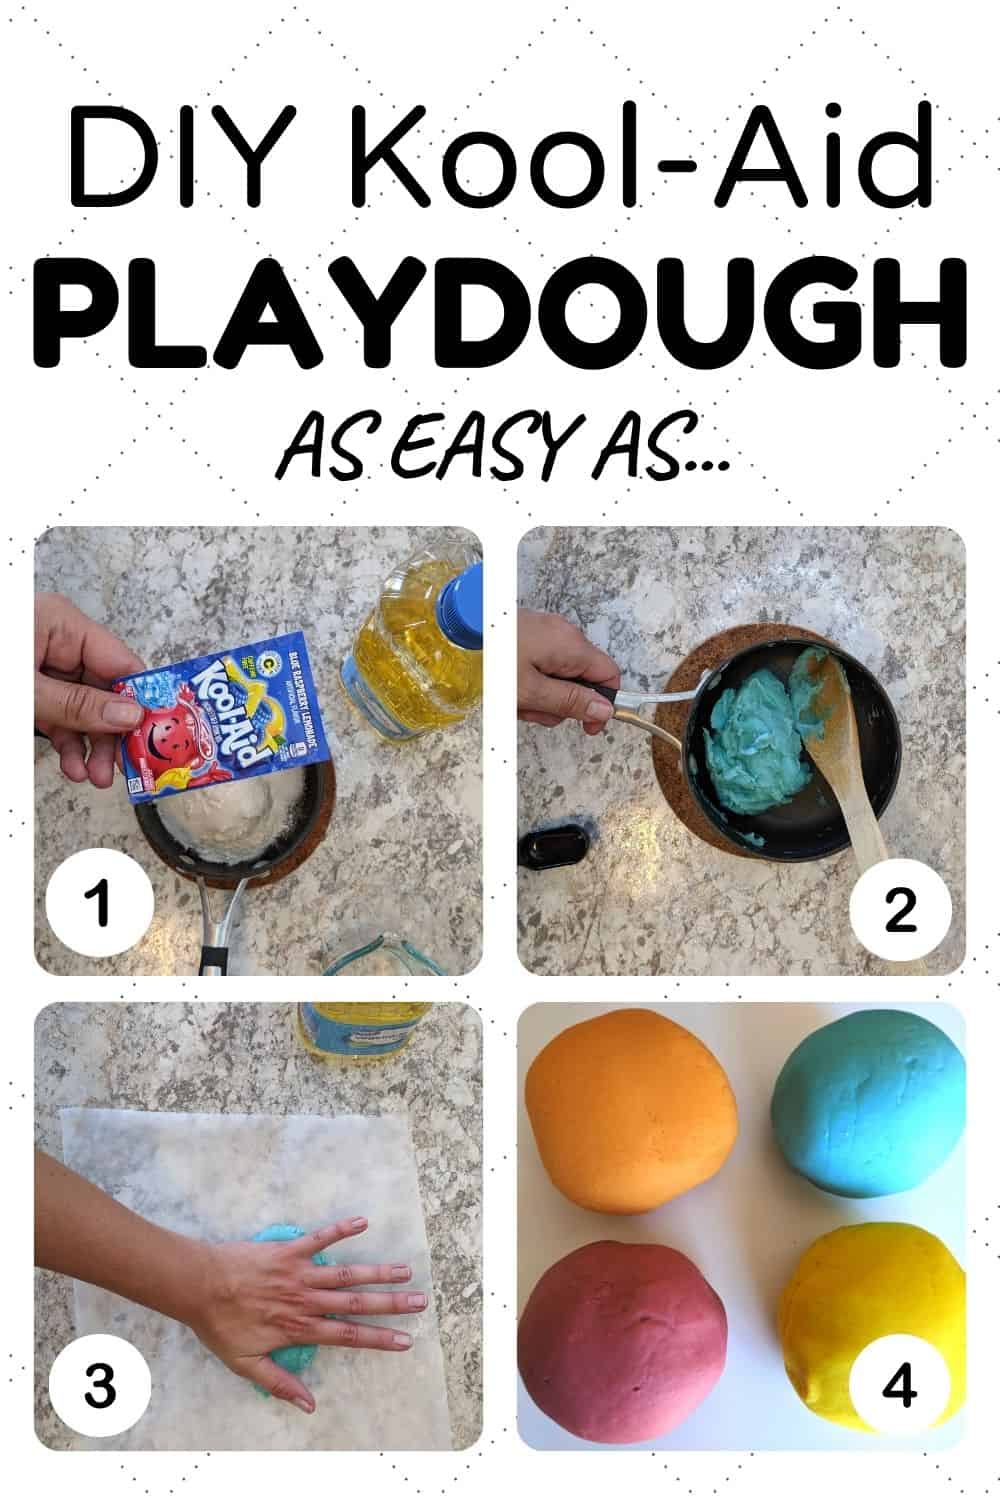 DIY Kool-Aid Playdough As Easy As 1, 2, 3, 4.  Pictures of mixing and preparing homemade playdough.